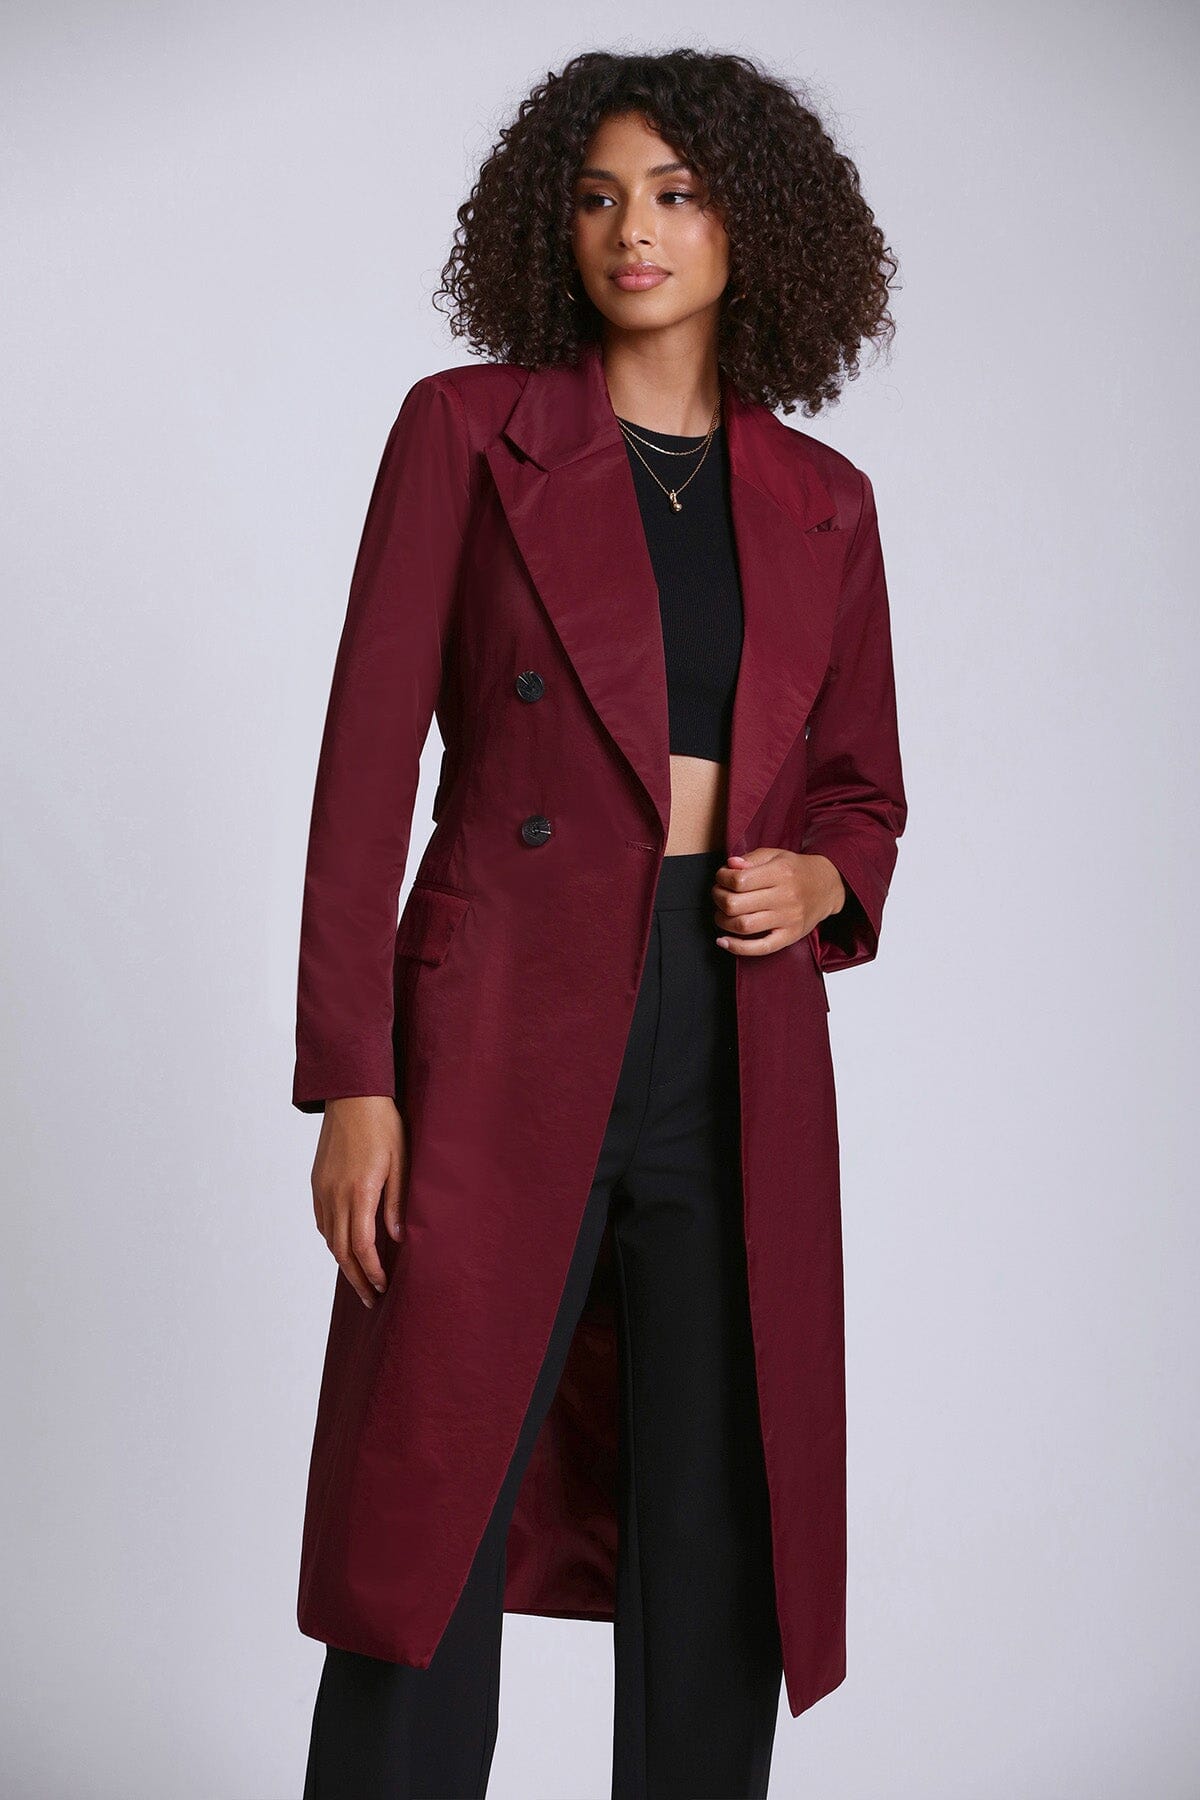 cotton nylon belted trench coat jacket burgundy red - figure flattering designer fashion day to night coats jackets for women